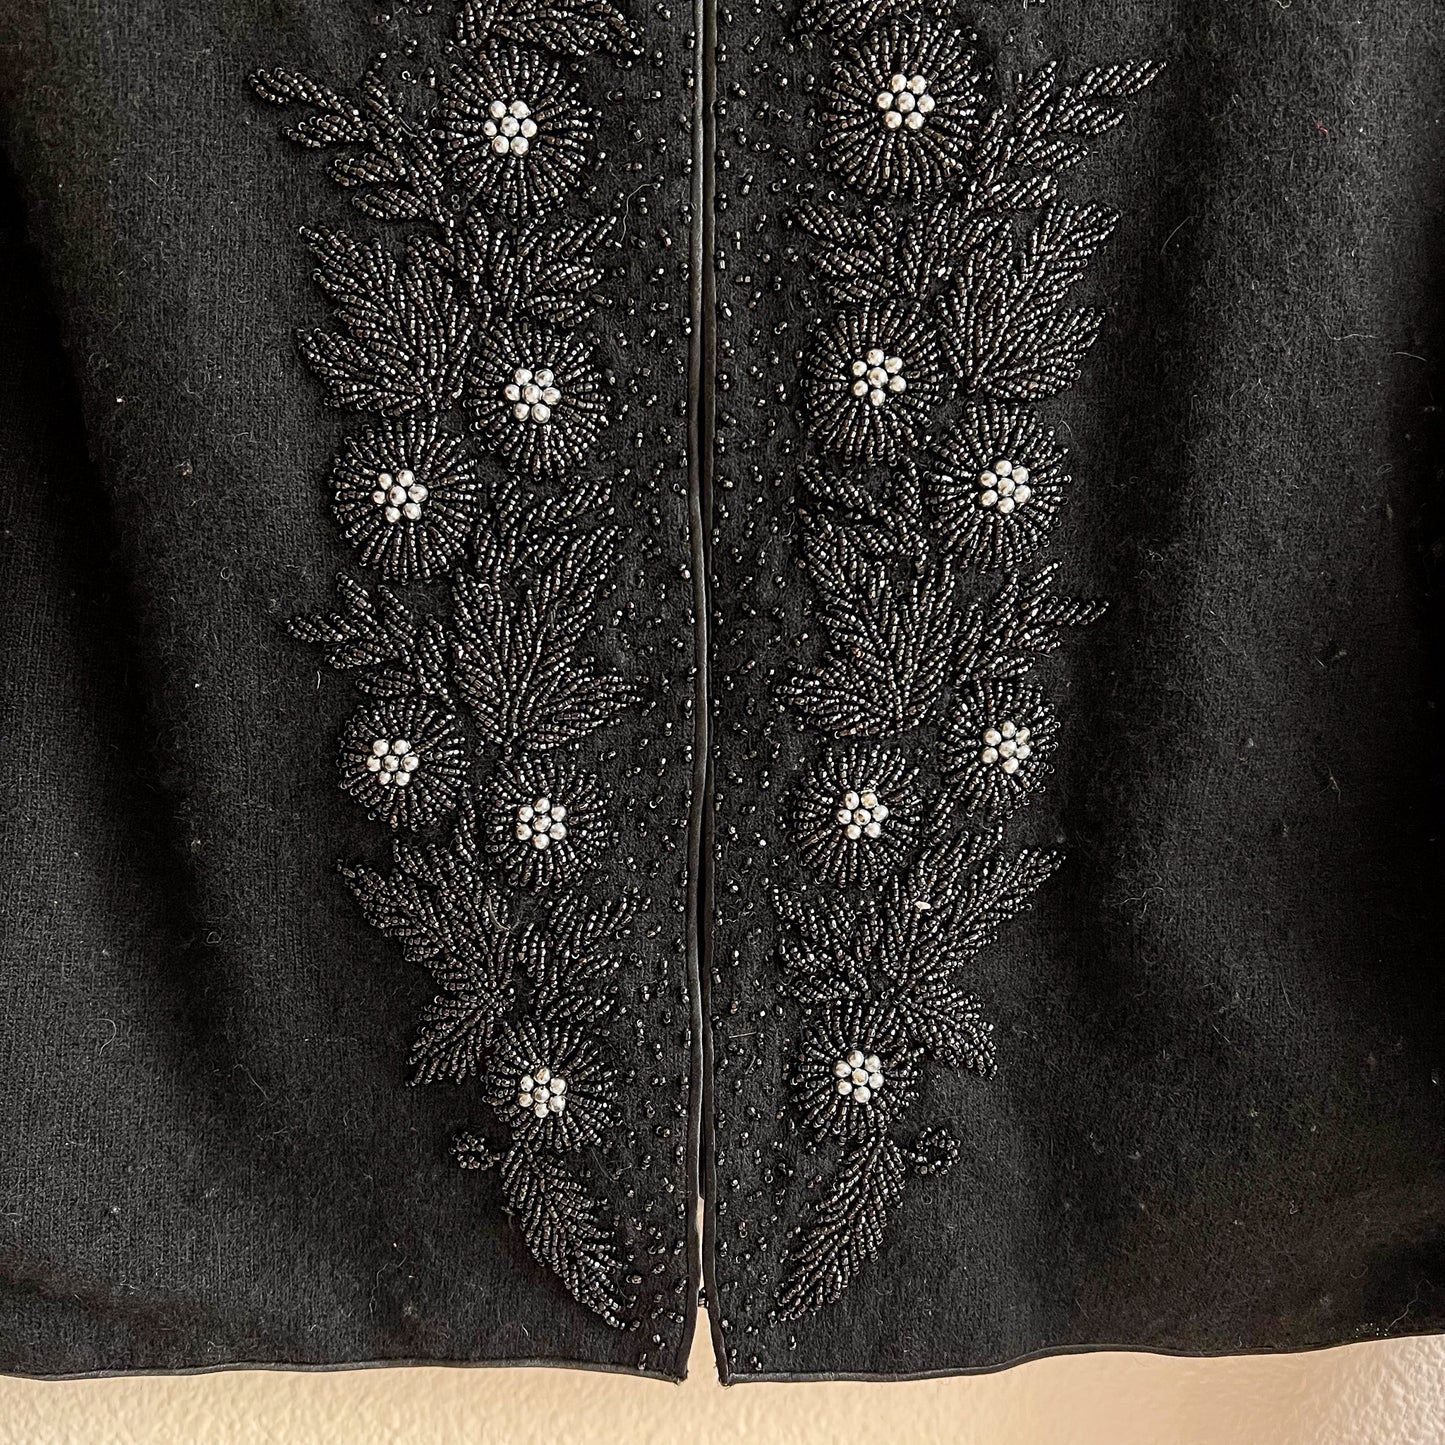 Darling 1950s Black Wool Cardigan With Beaded Floral Details (XS/S)